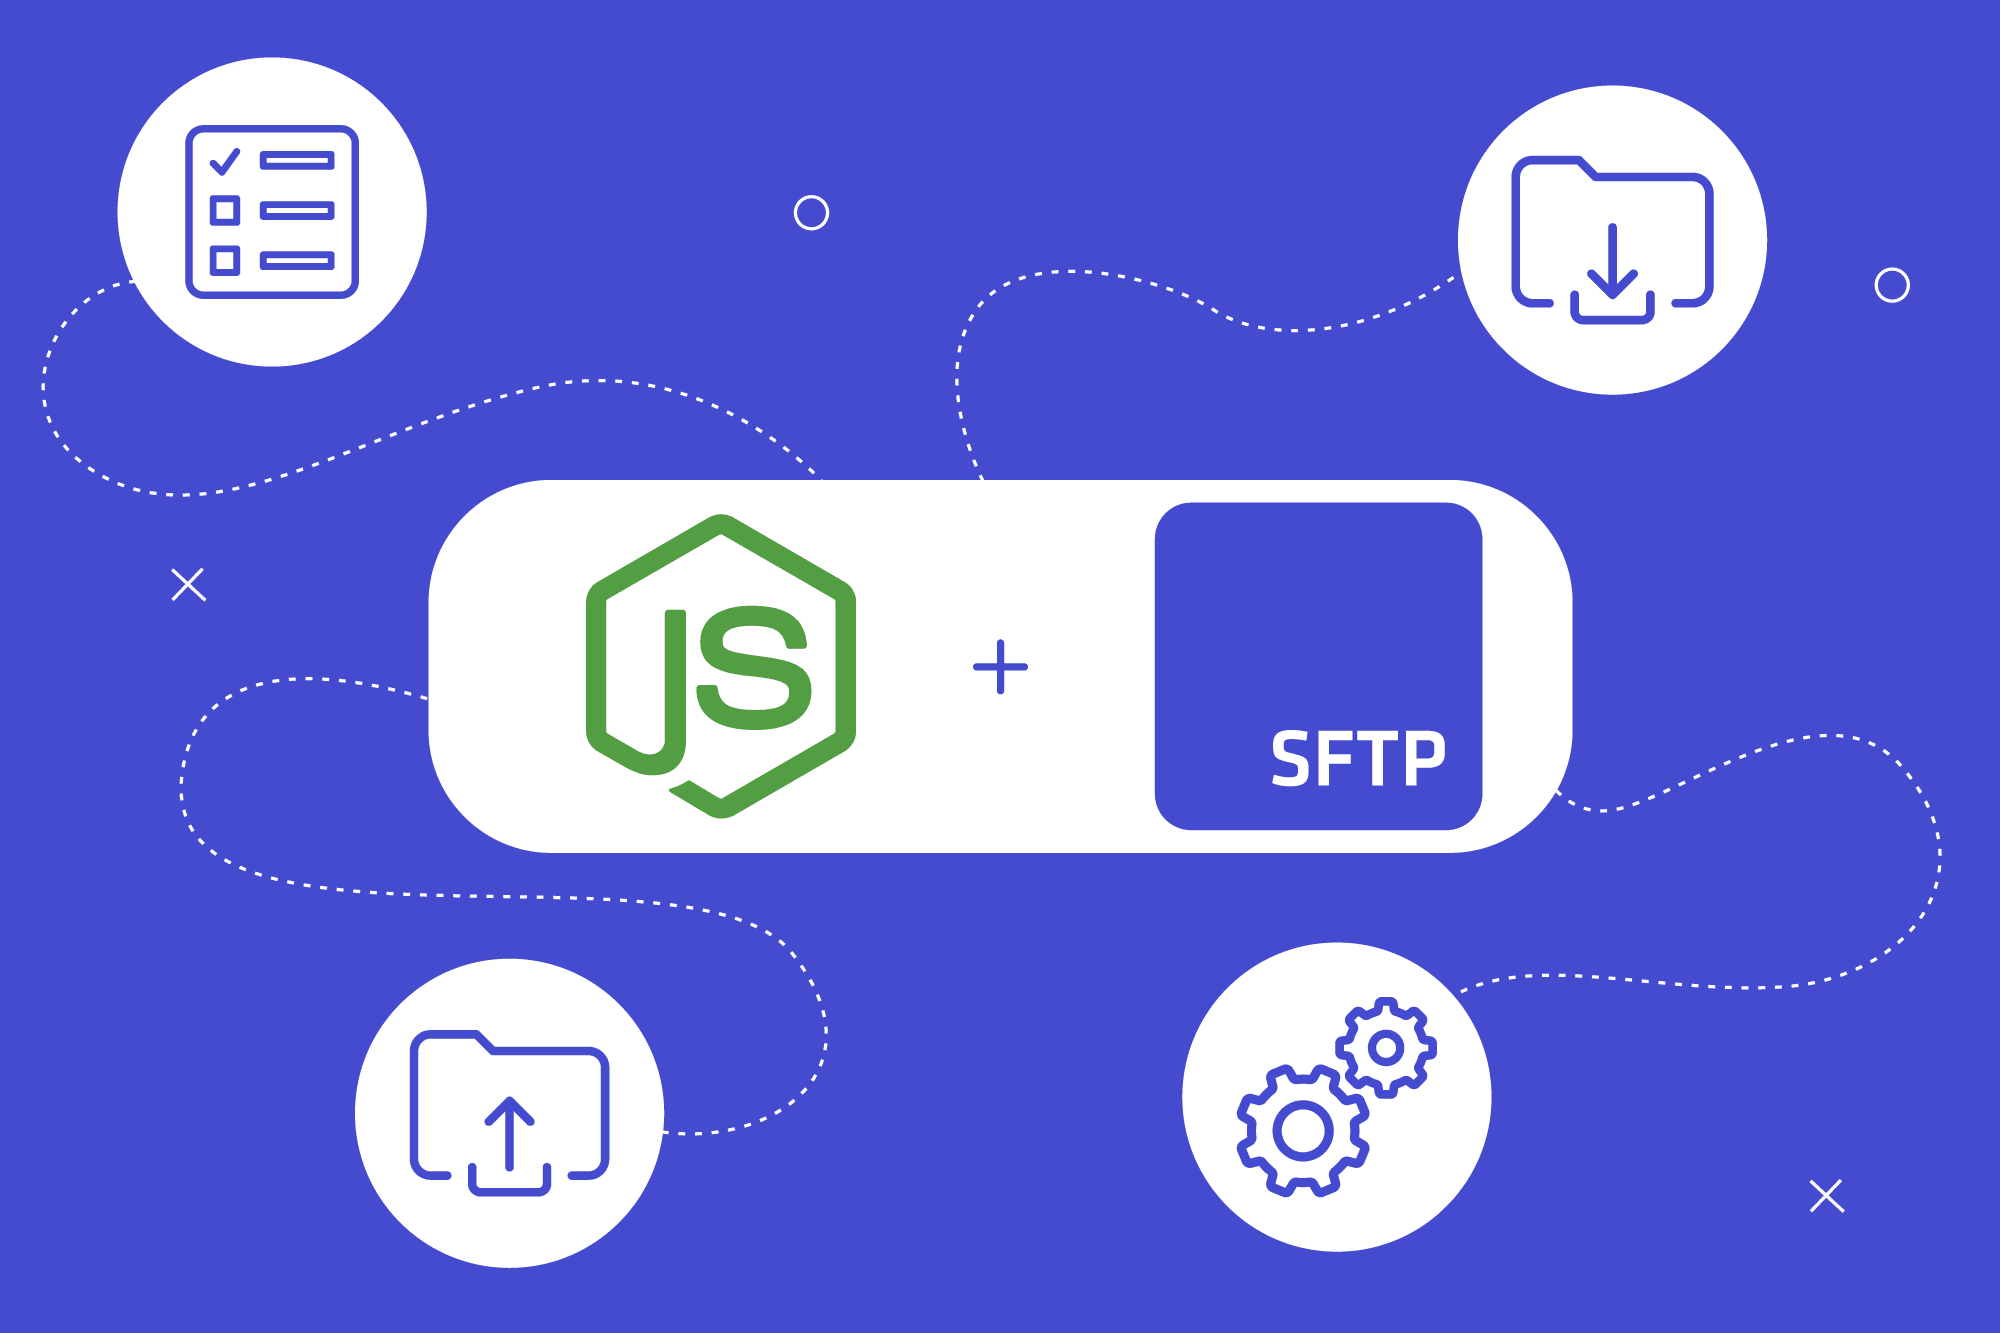 How to connect to SFTP in Node.js